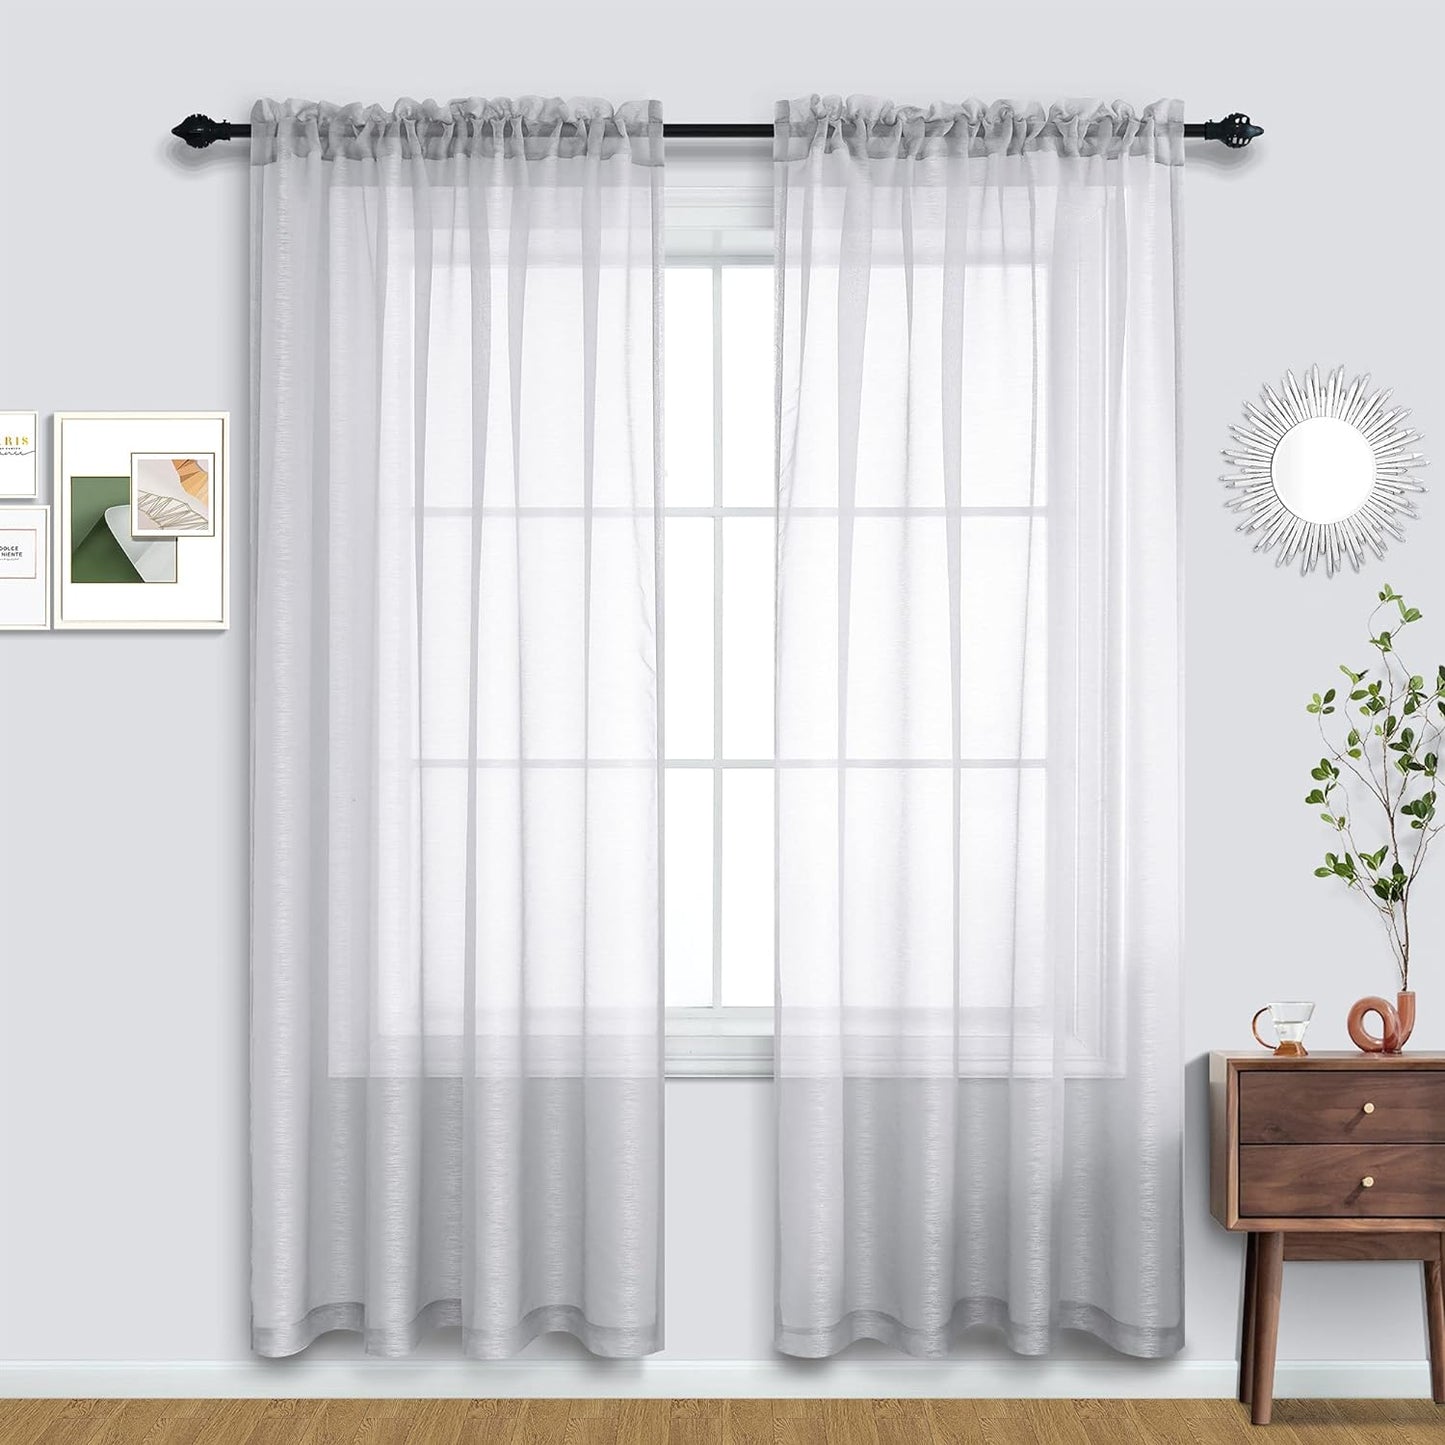 Terracotta Curtains 84 Inch Length for Living Room 2 Panel Sets Rod Pocket Sheer Curtains for Living Room Rust Burnt Orange Red  PITALK TEXTILE Silver 52X96 